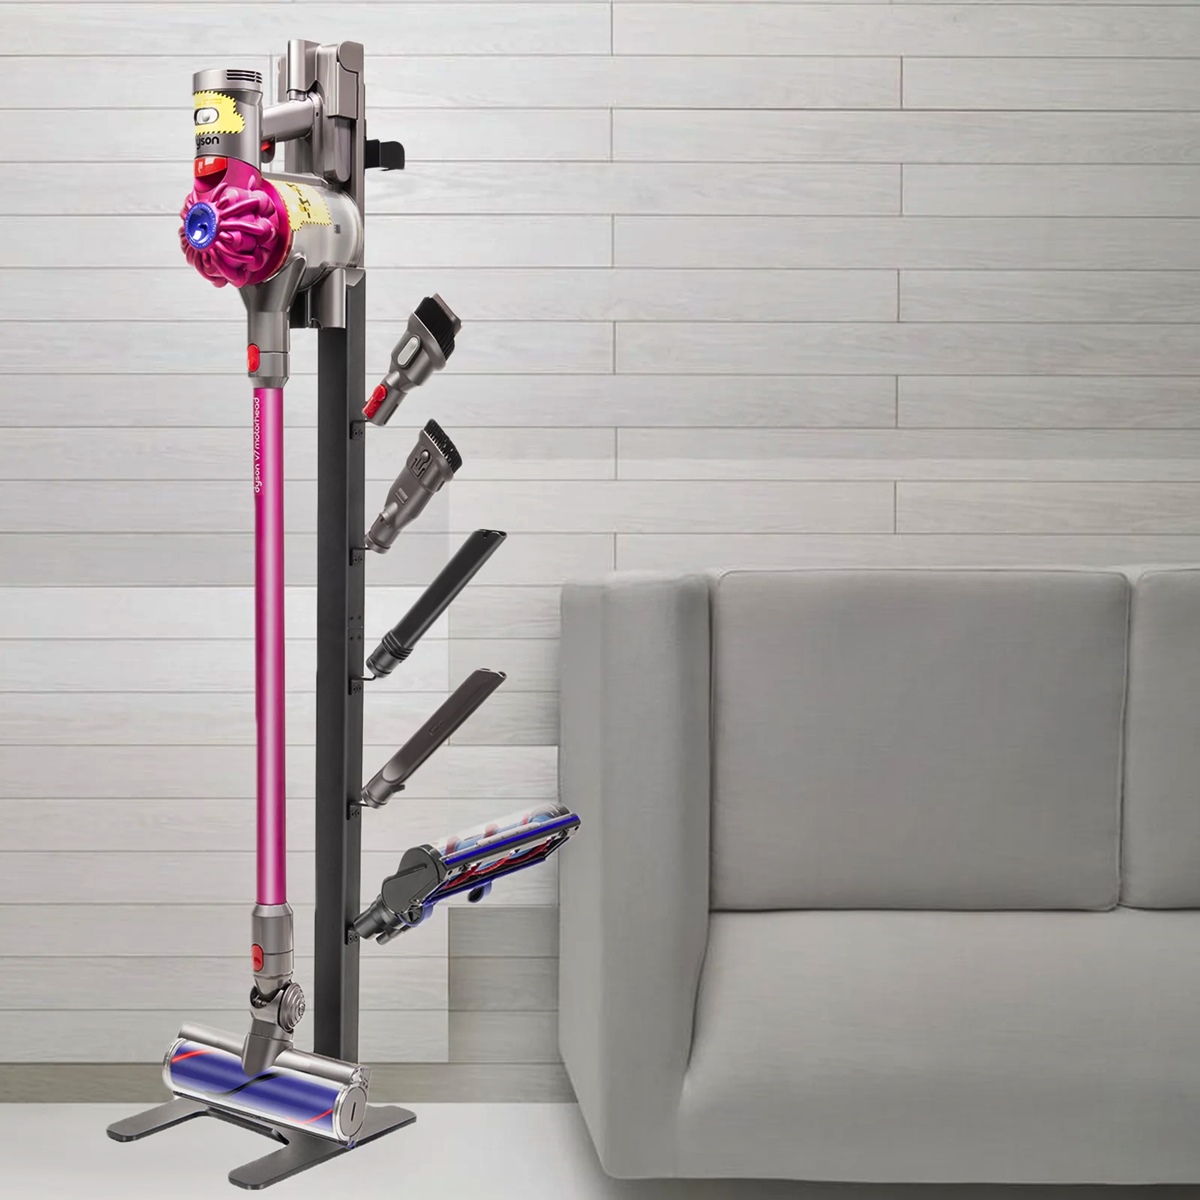 understanding-the-functionality-of-dyson-docking-station